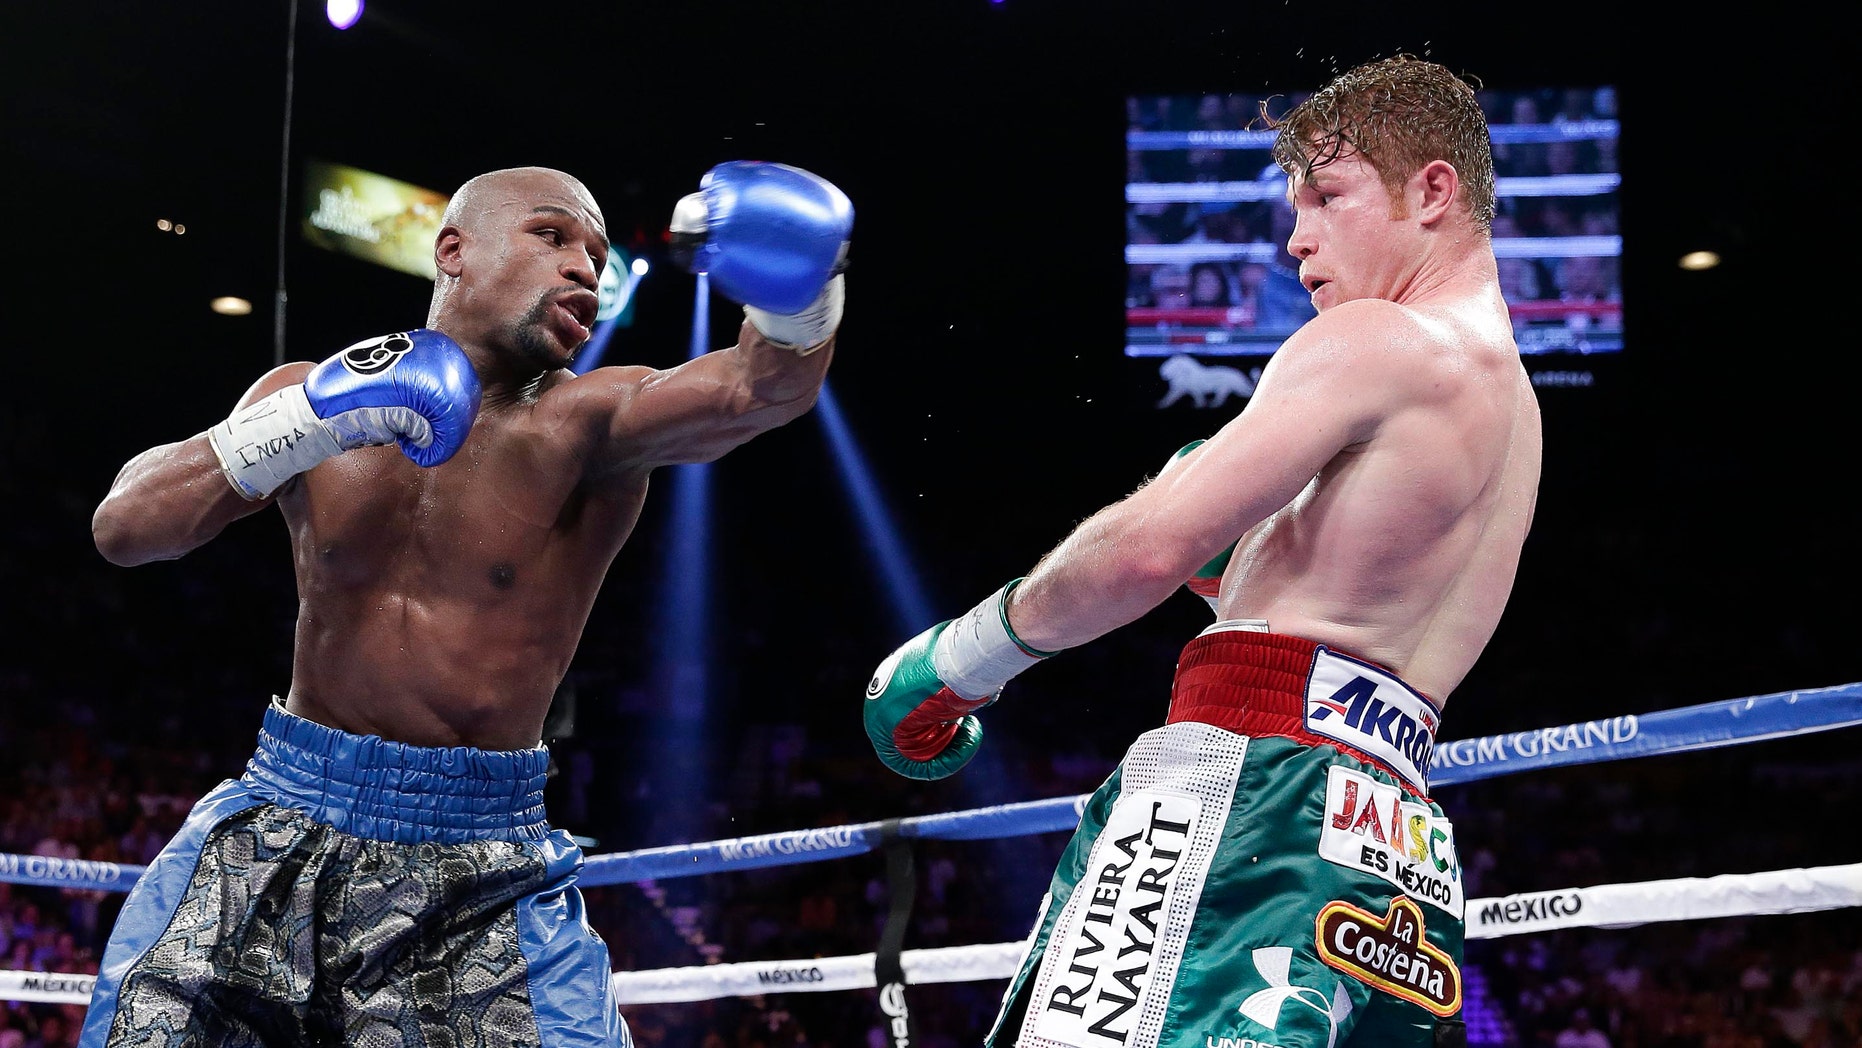 Judge From Canelo-Mayweather Fight Widely Criticized, Quits Temporarily ...